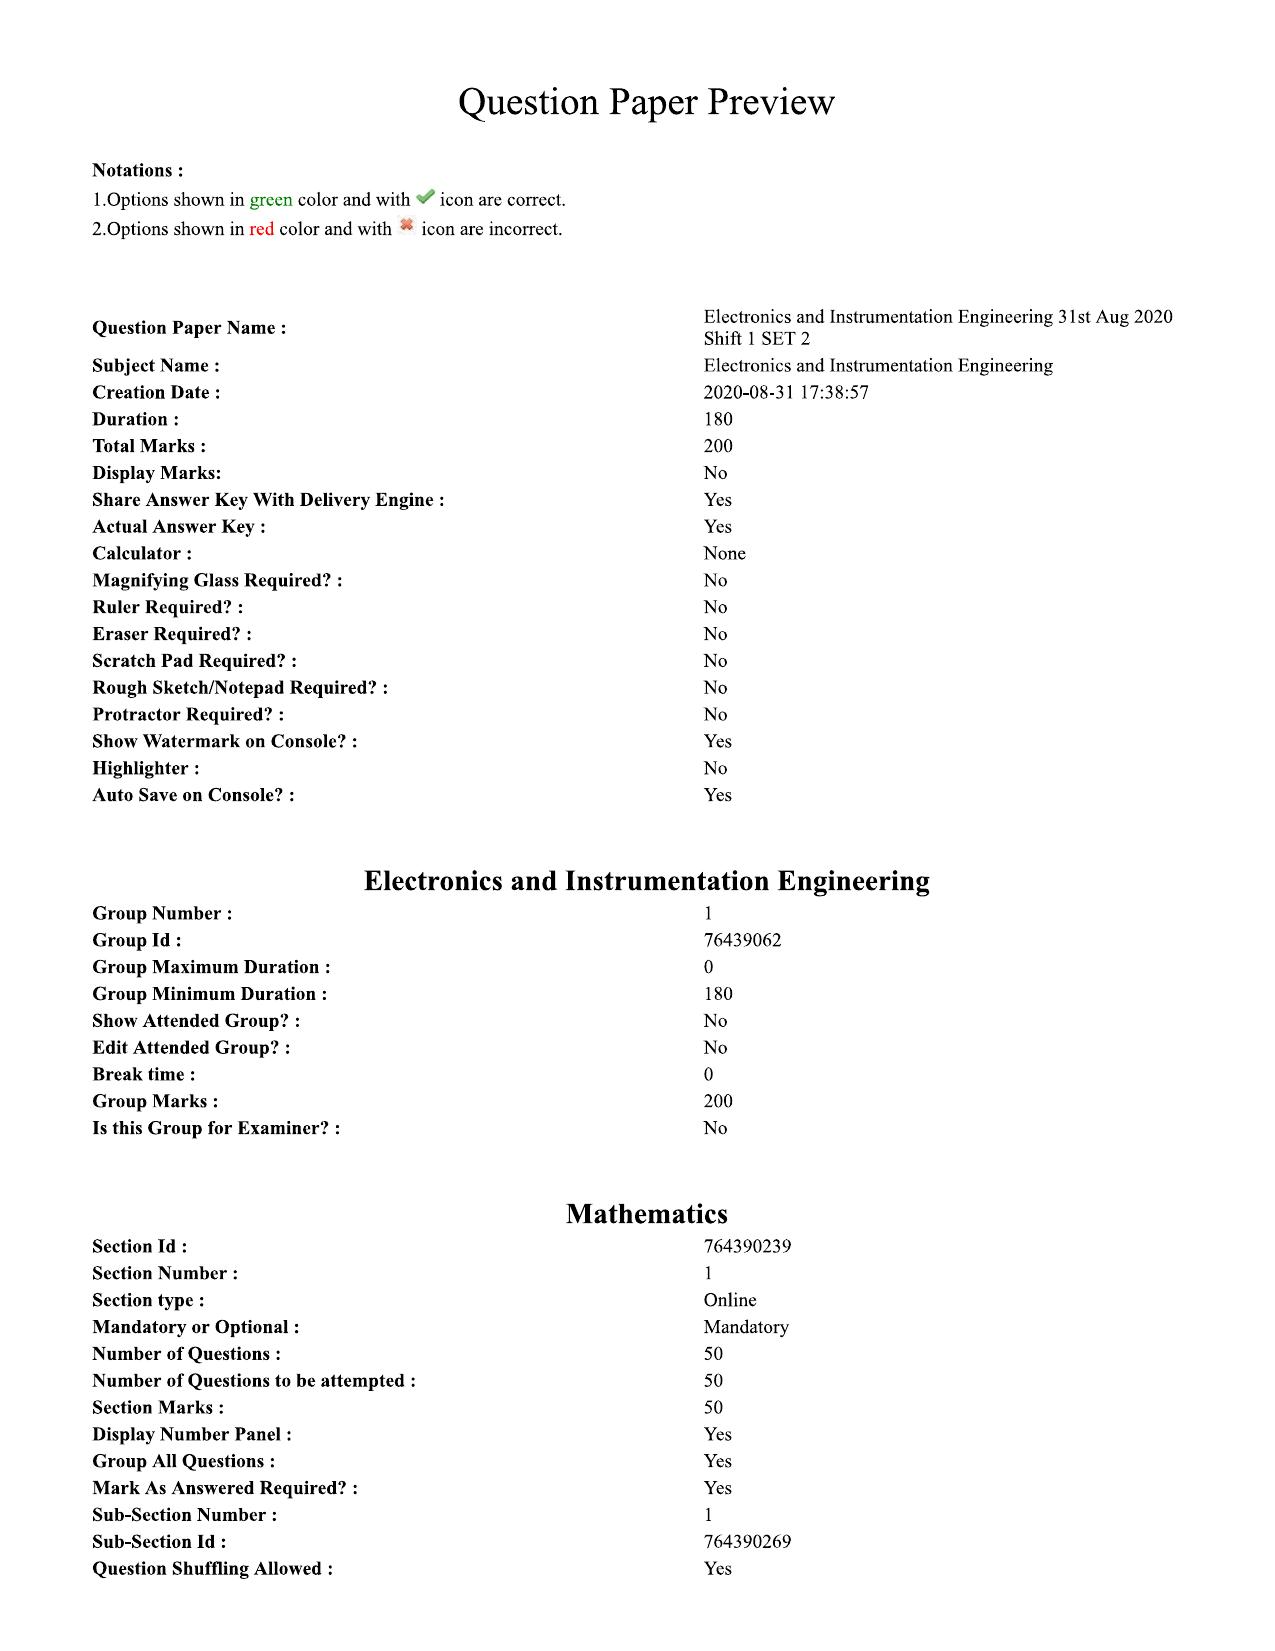 TS ECET 2020 Electronics and Instrumentation Engineering's Question Paper - Page 1